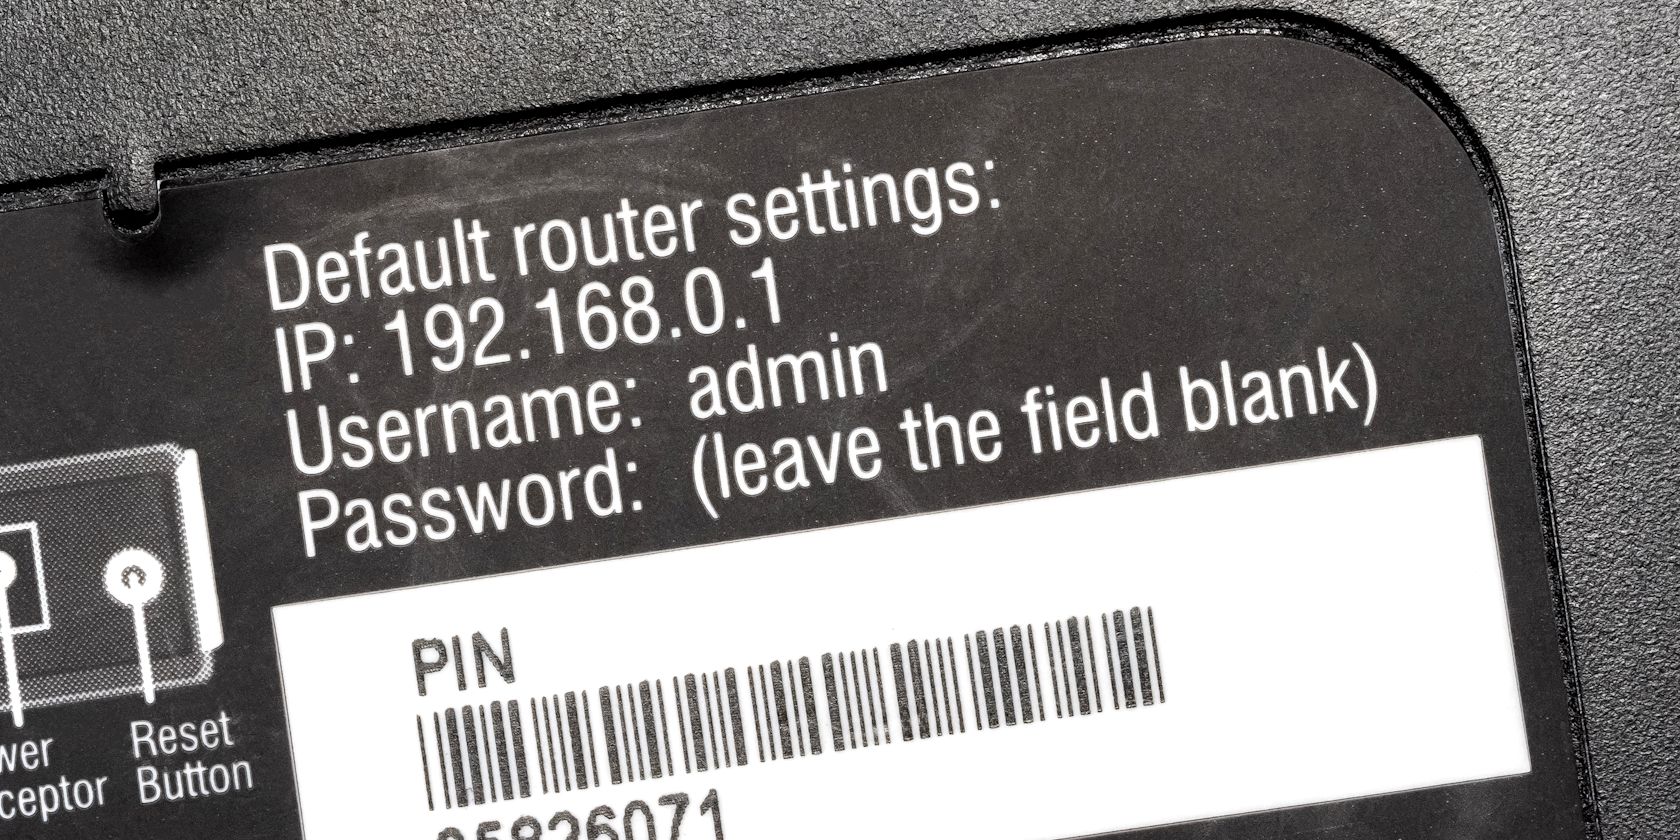 default password and admin account on router